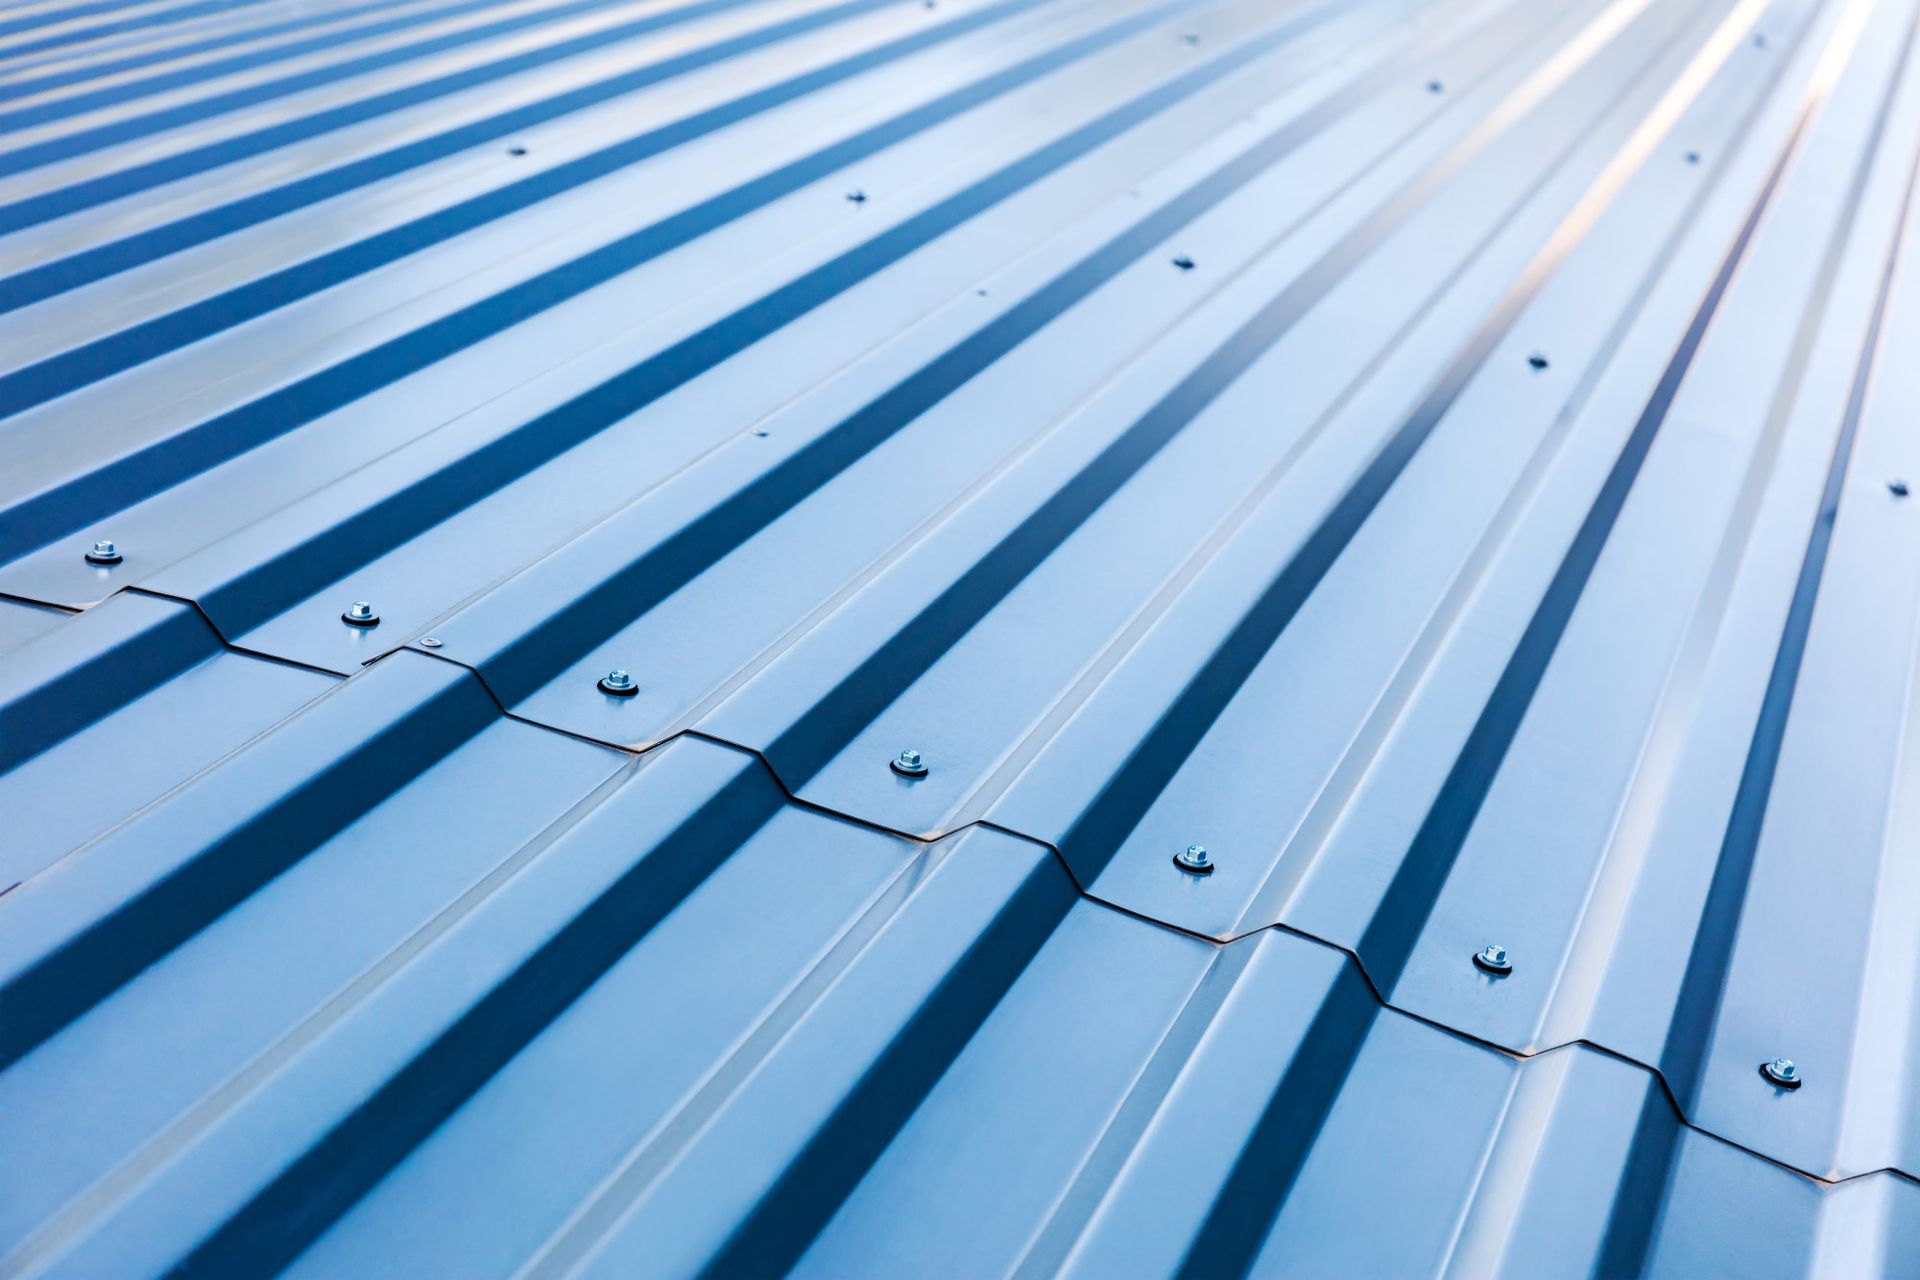 Cost, near me, commercial, home, metal roofing, corrugated, galvanized sheet metal, standing seam,